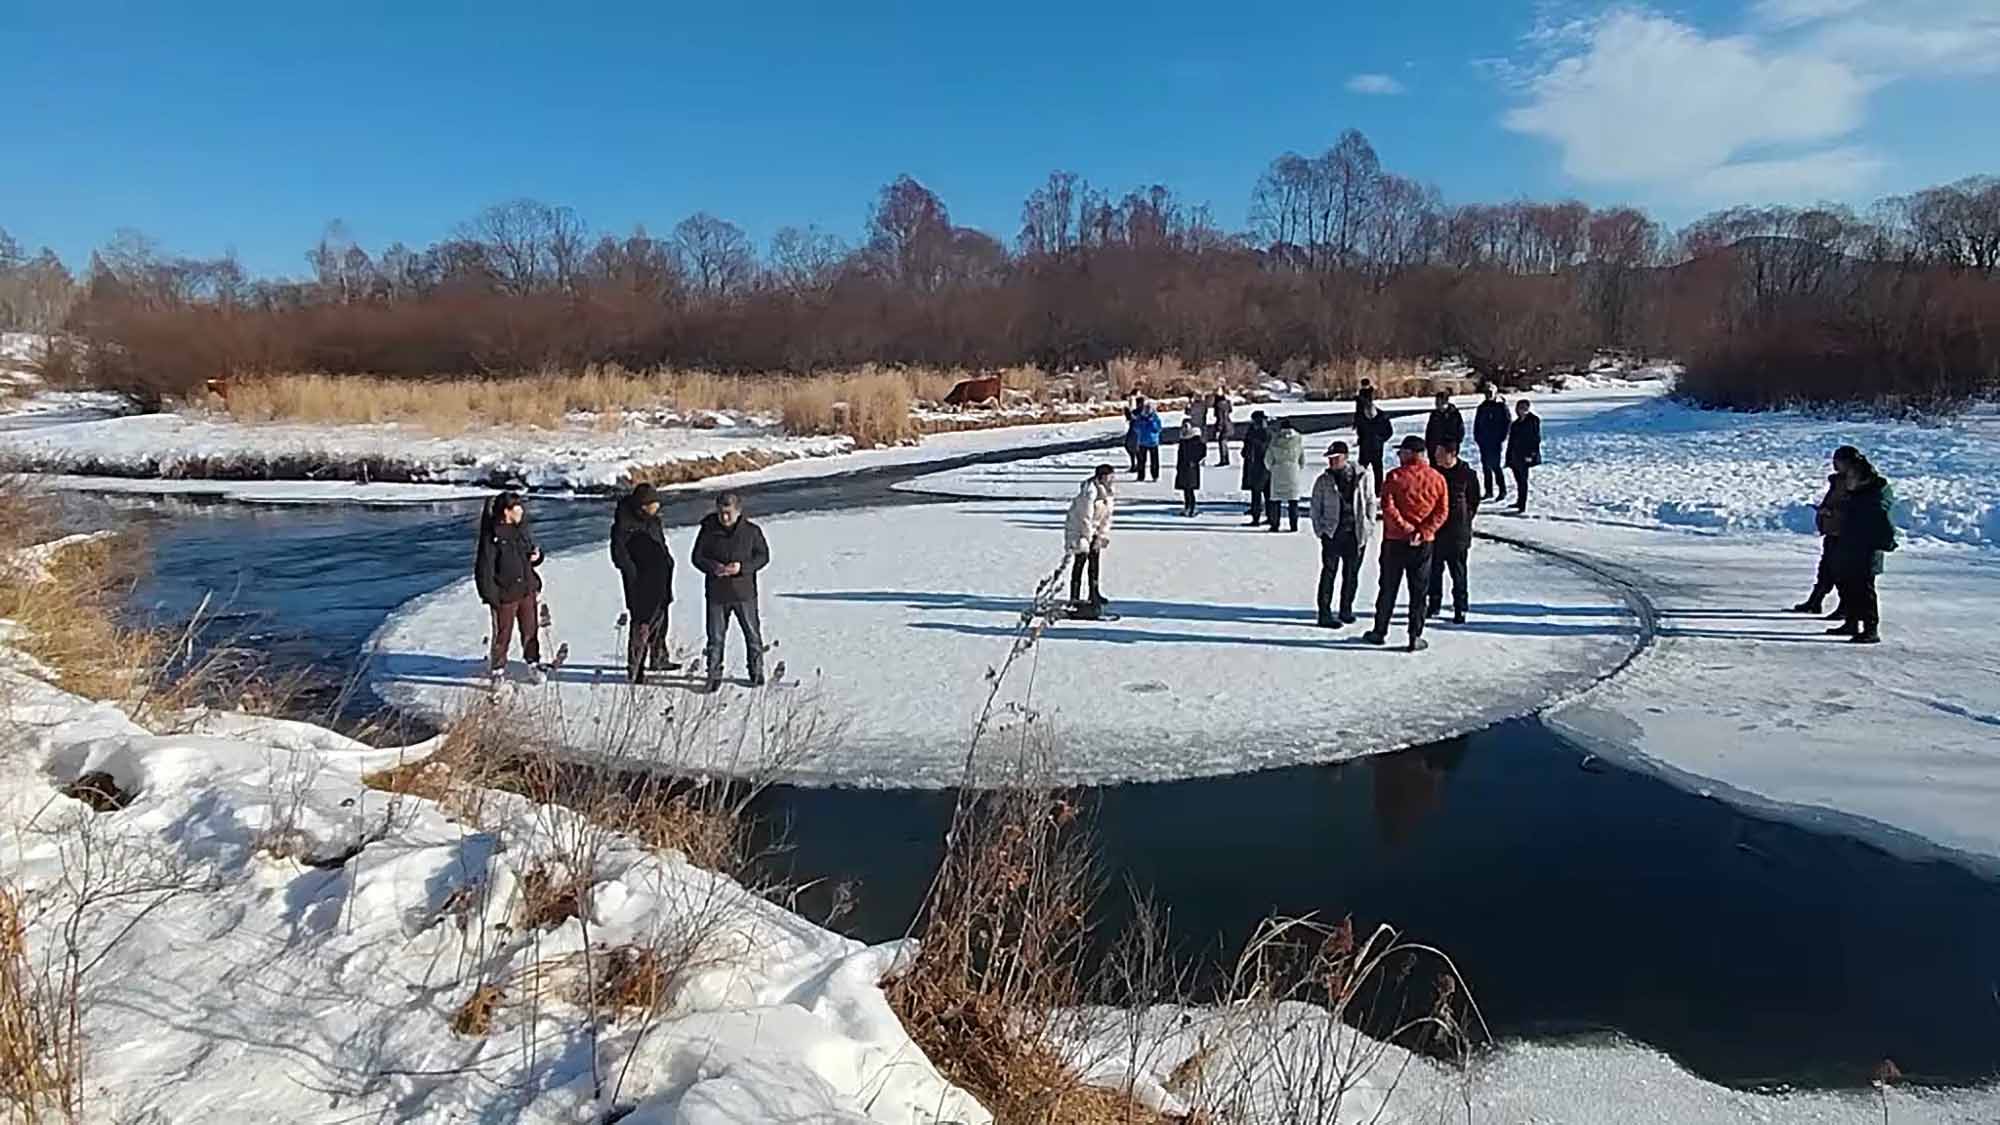 Excited Locals Go For Spin On Giant Ice Circle Formed On Frozen River